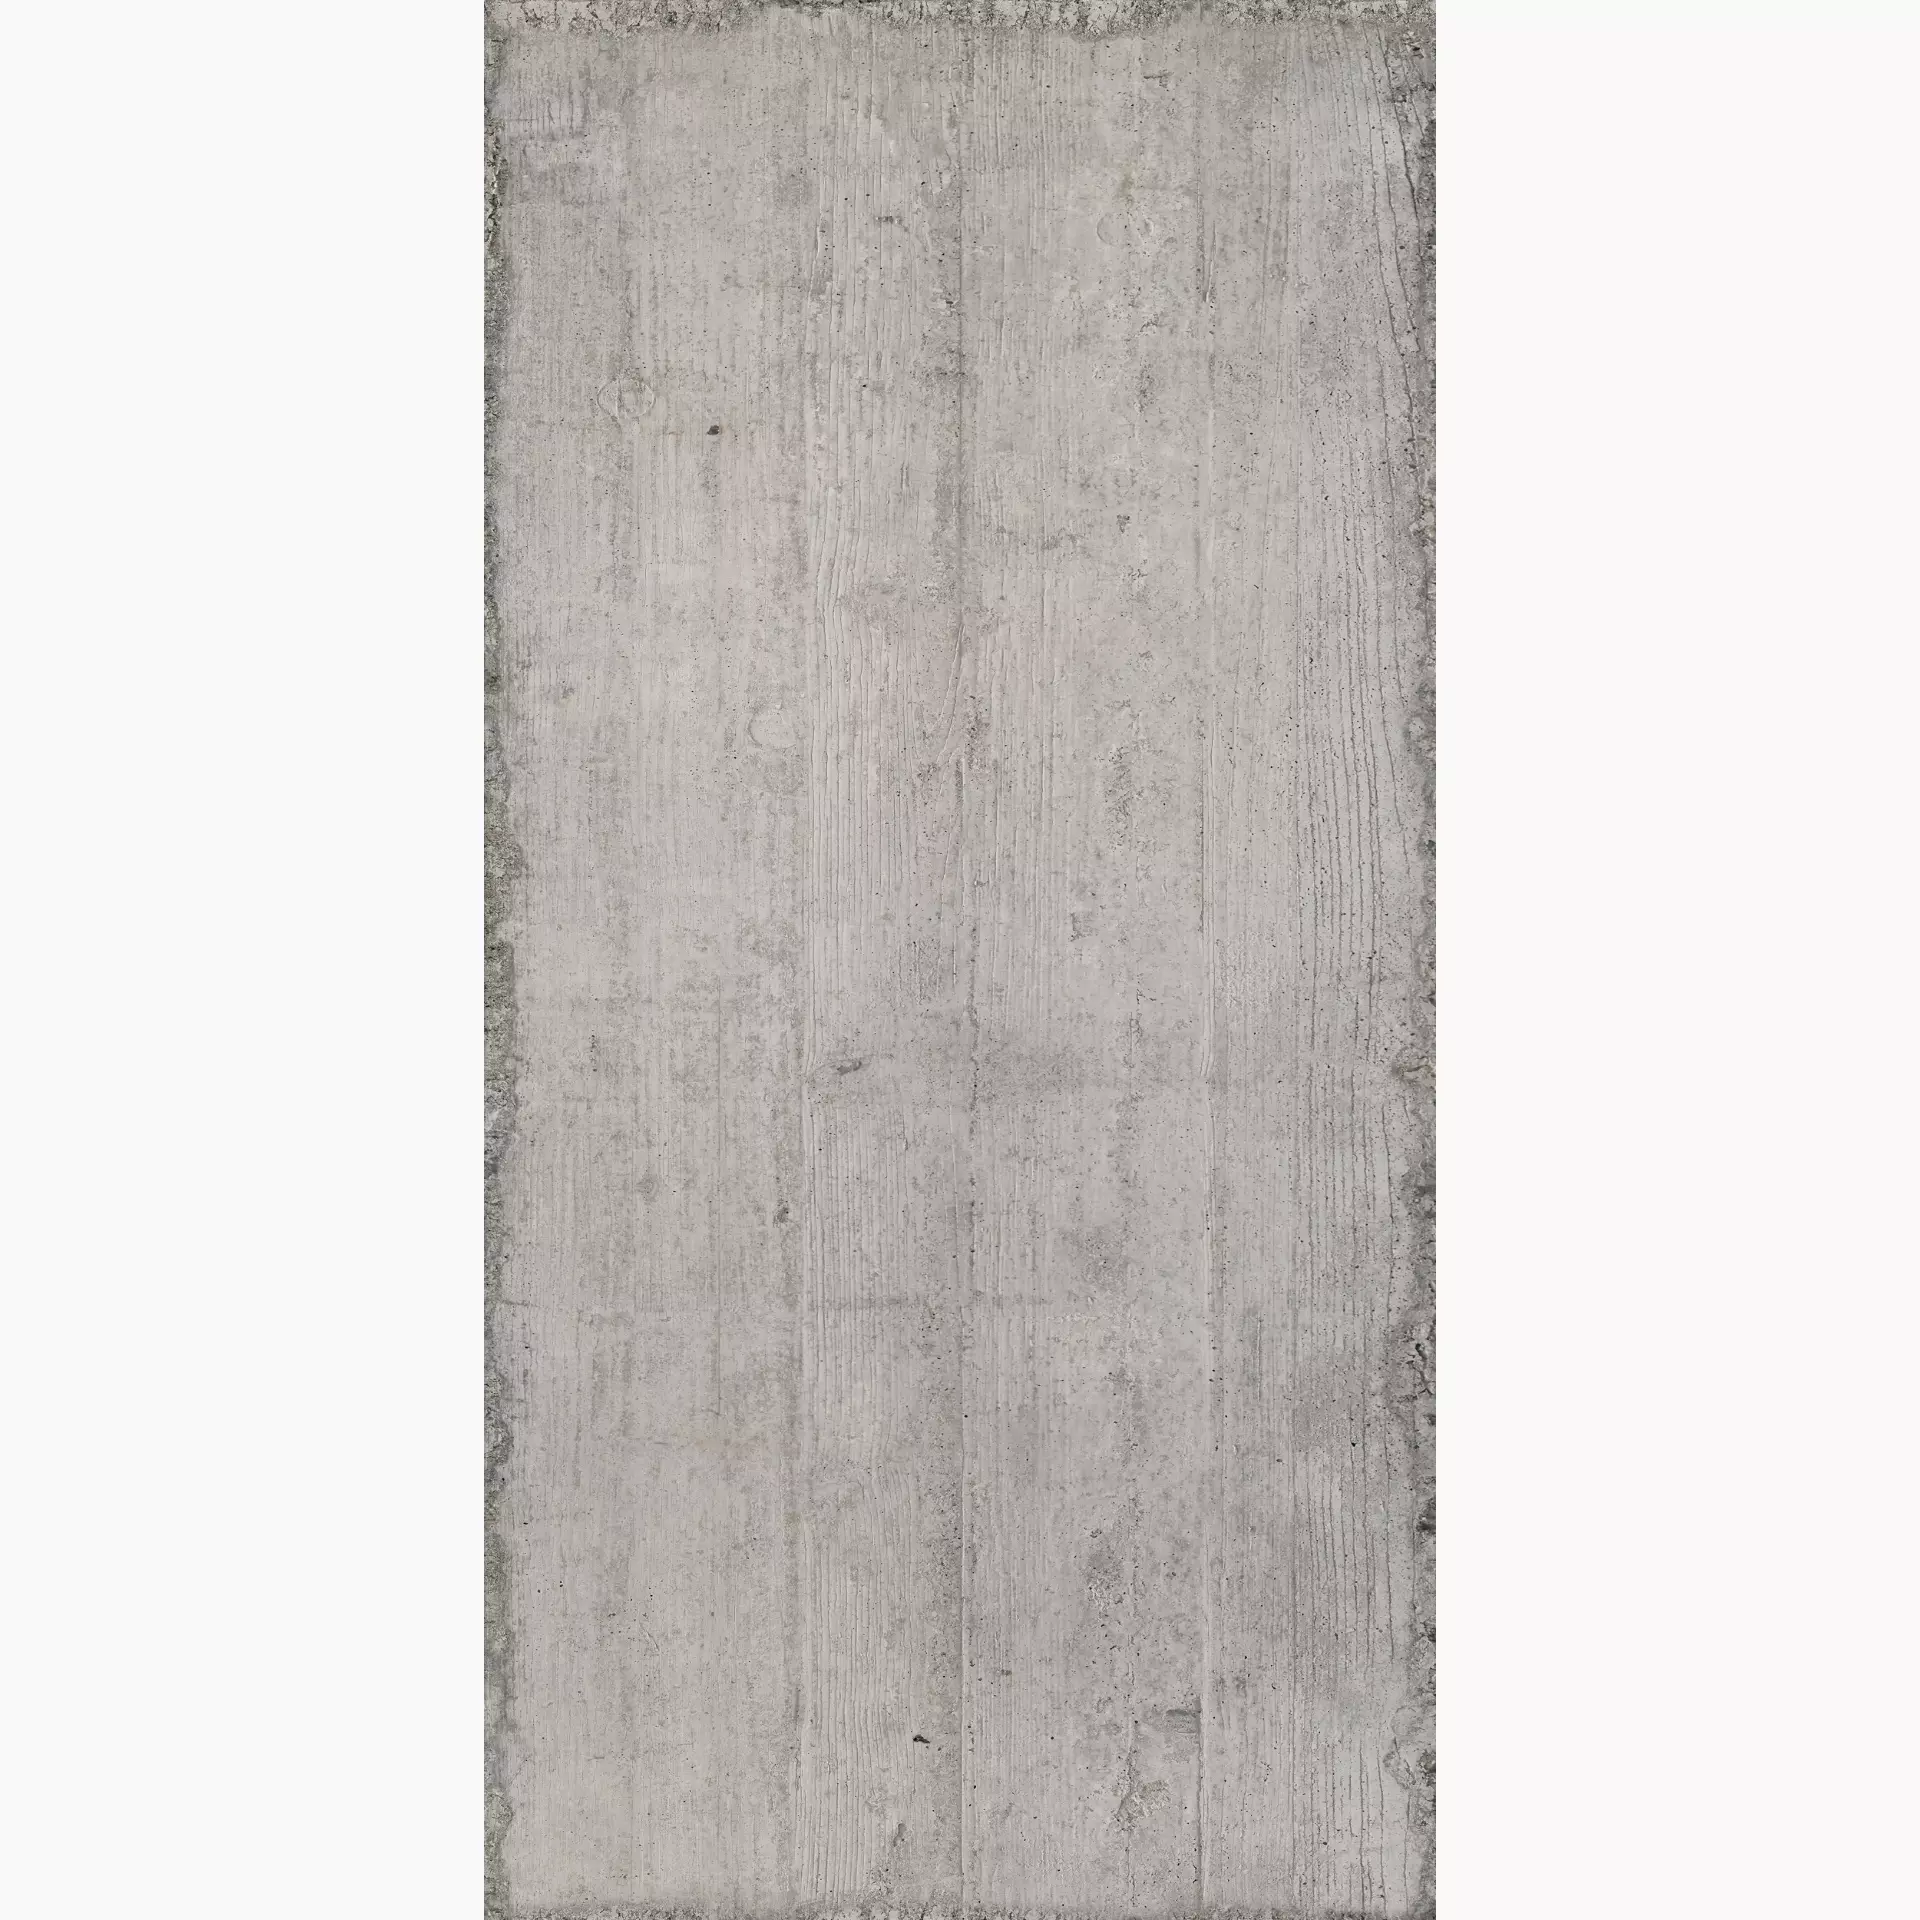 Sant Agostino Form Cement Natural CSAFORCE12 60x120cm rectified 10mm